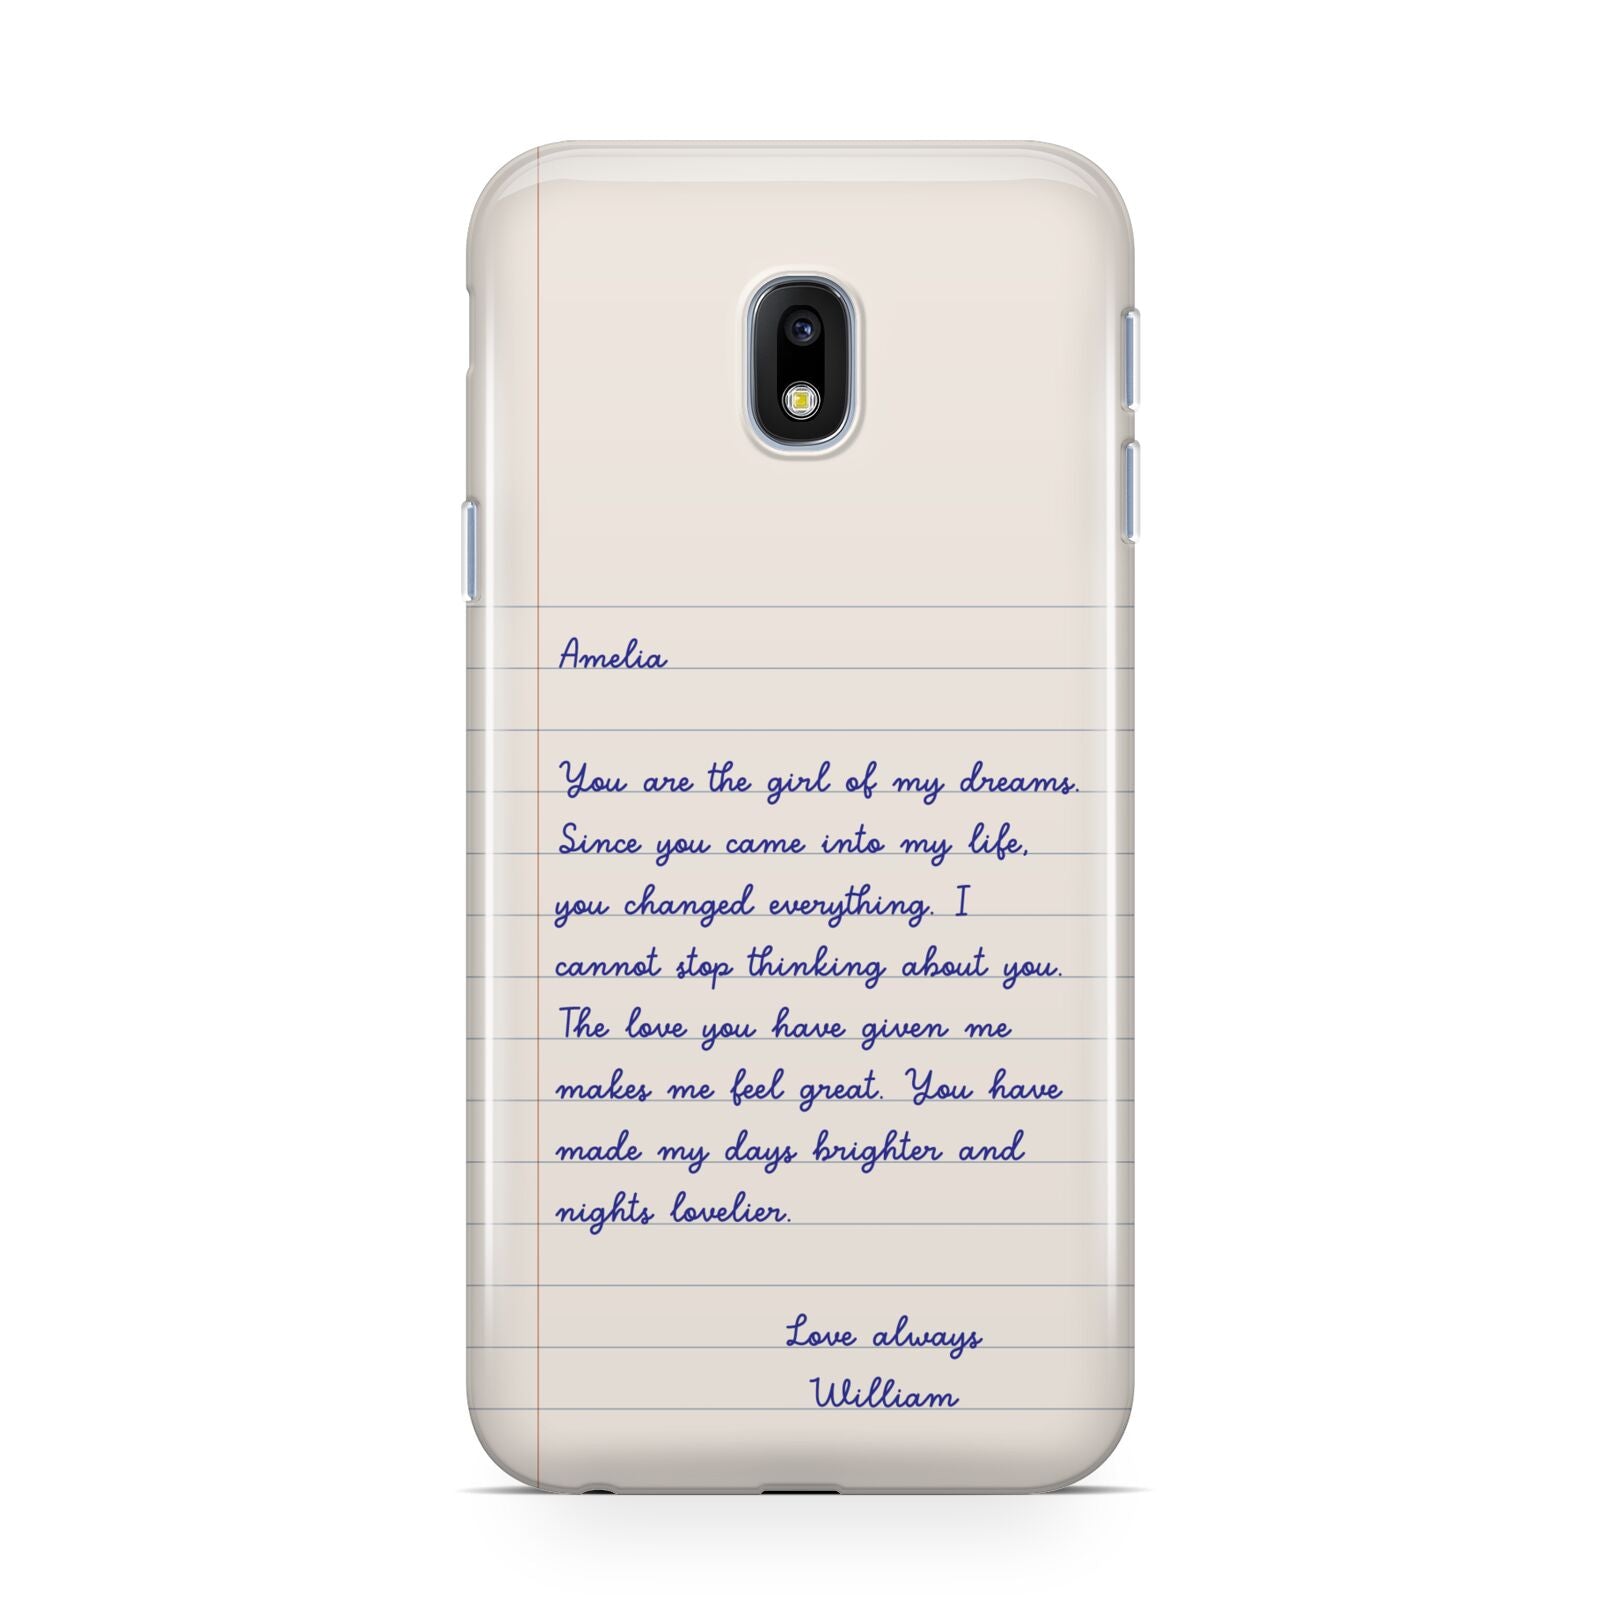 Personalised Love Letter Samsung Galaxy J3 2017 Case